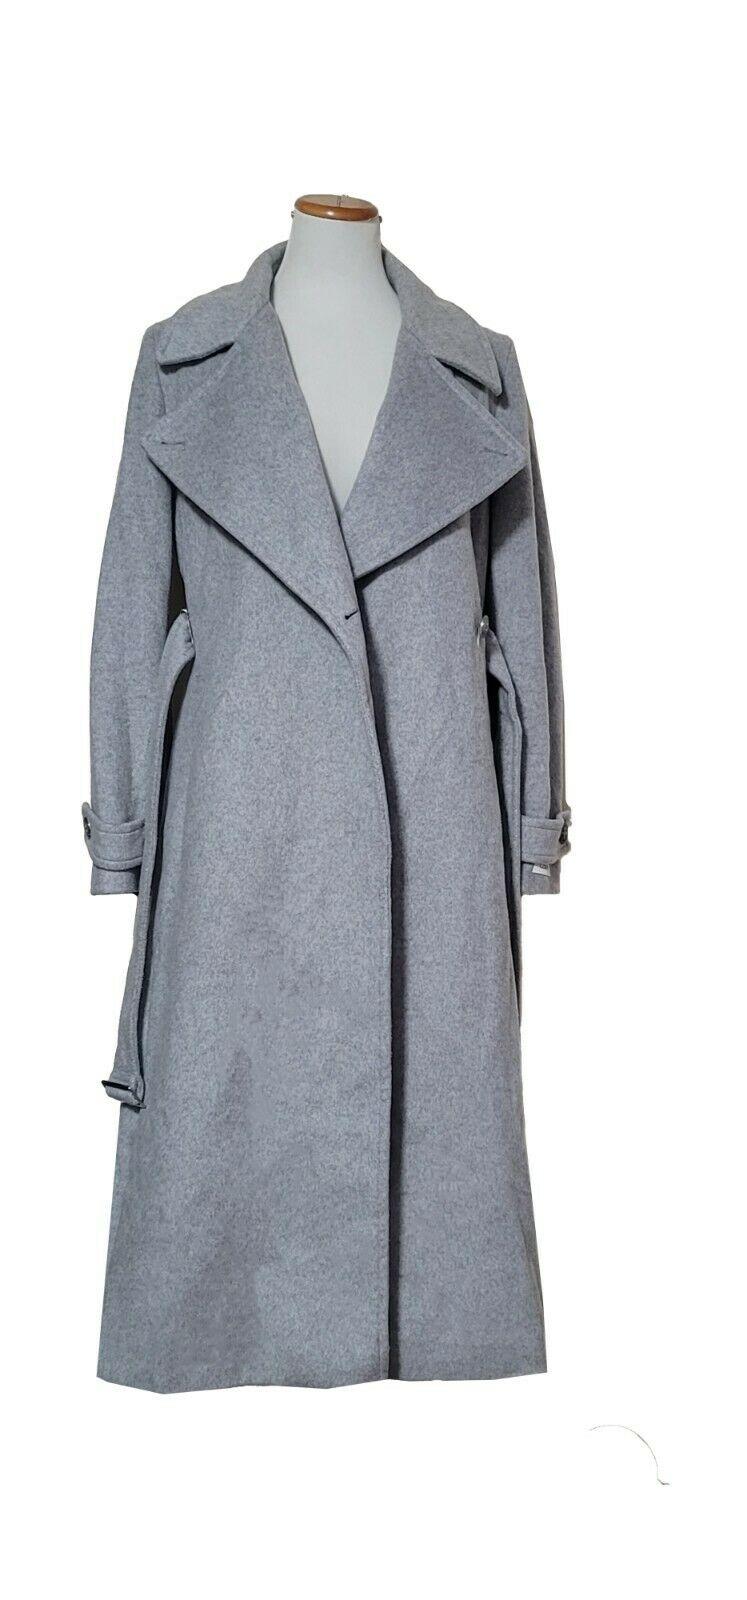 Calvin Klein Wool Blend Trench Wrap Maxi Coat with Side Splits Size 12 - SVNYFancy